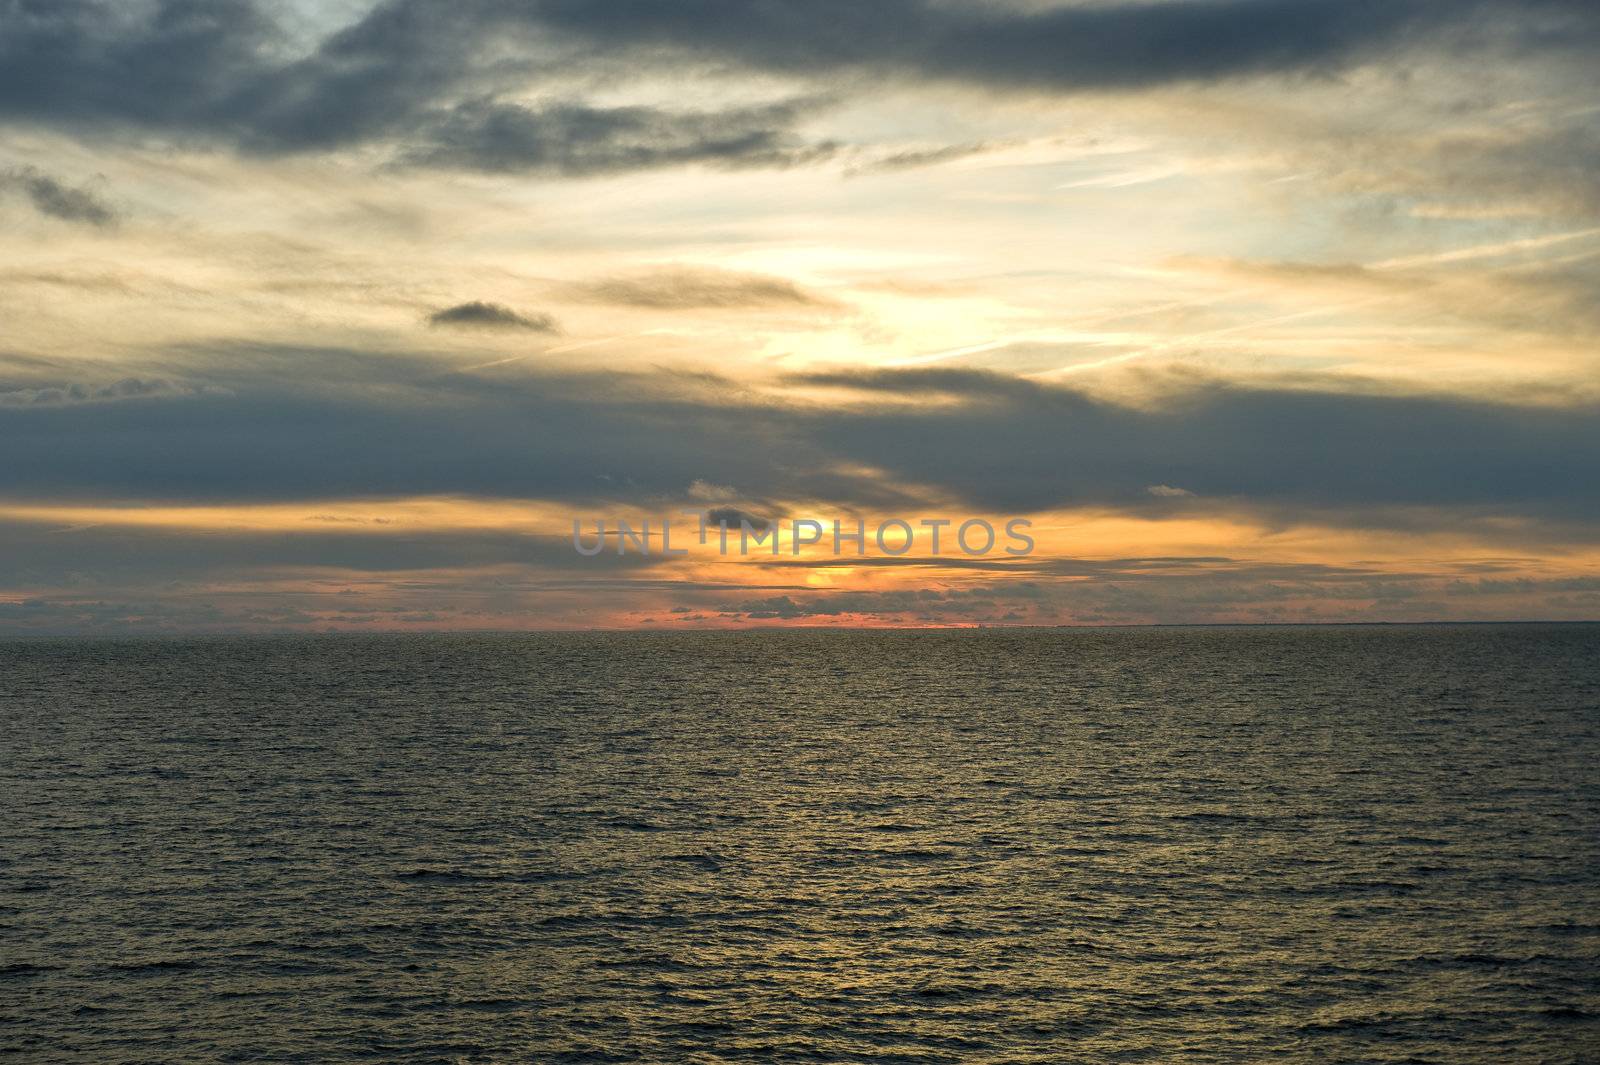 View of sunset over baltic sea, taken near Sweden